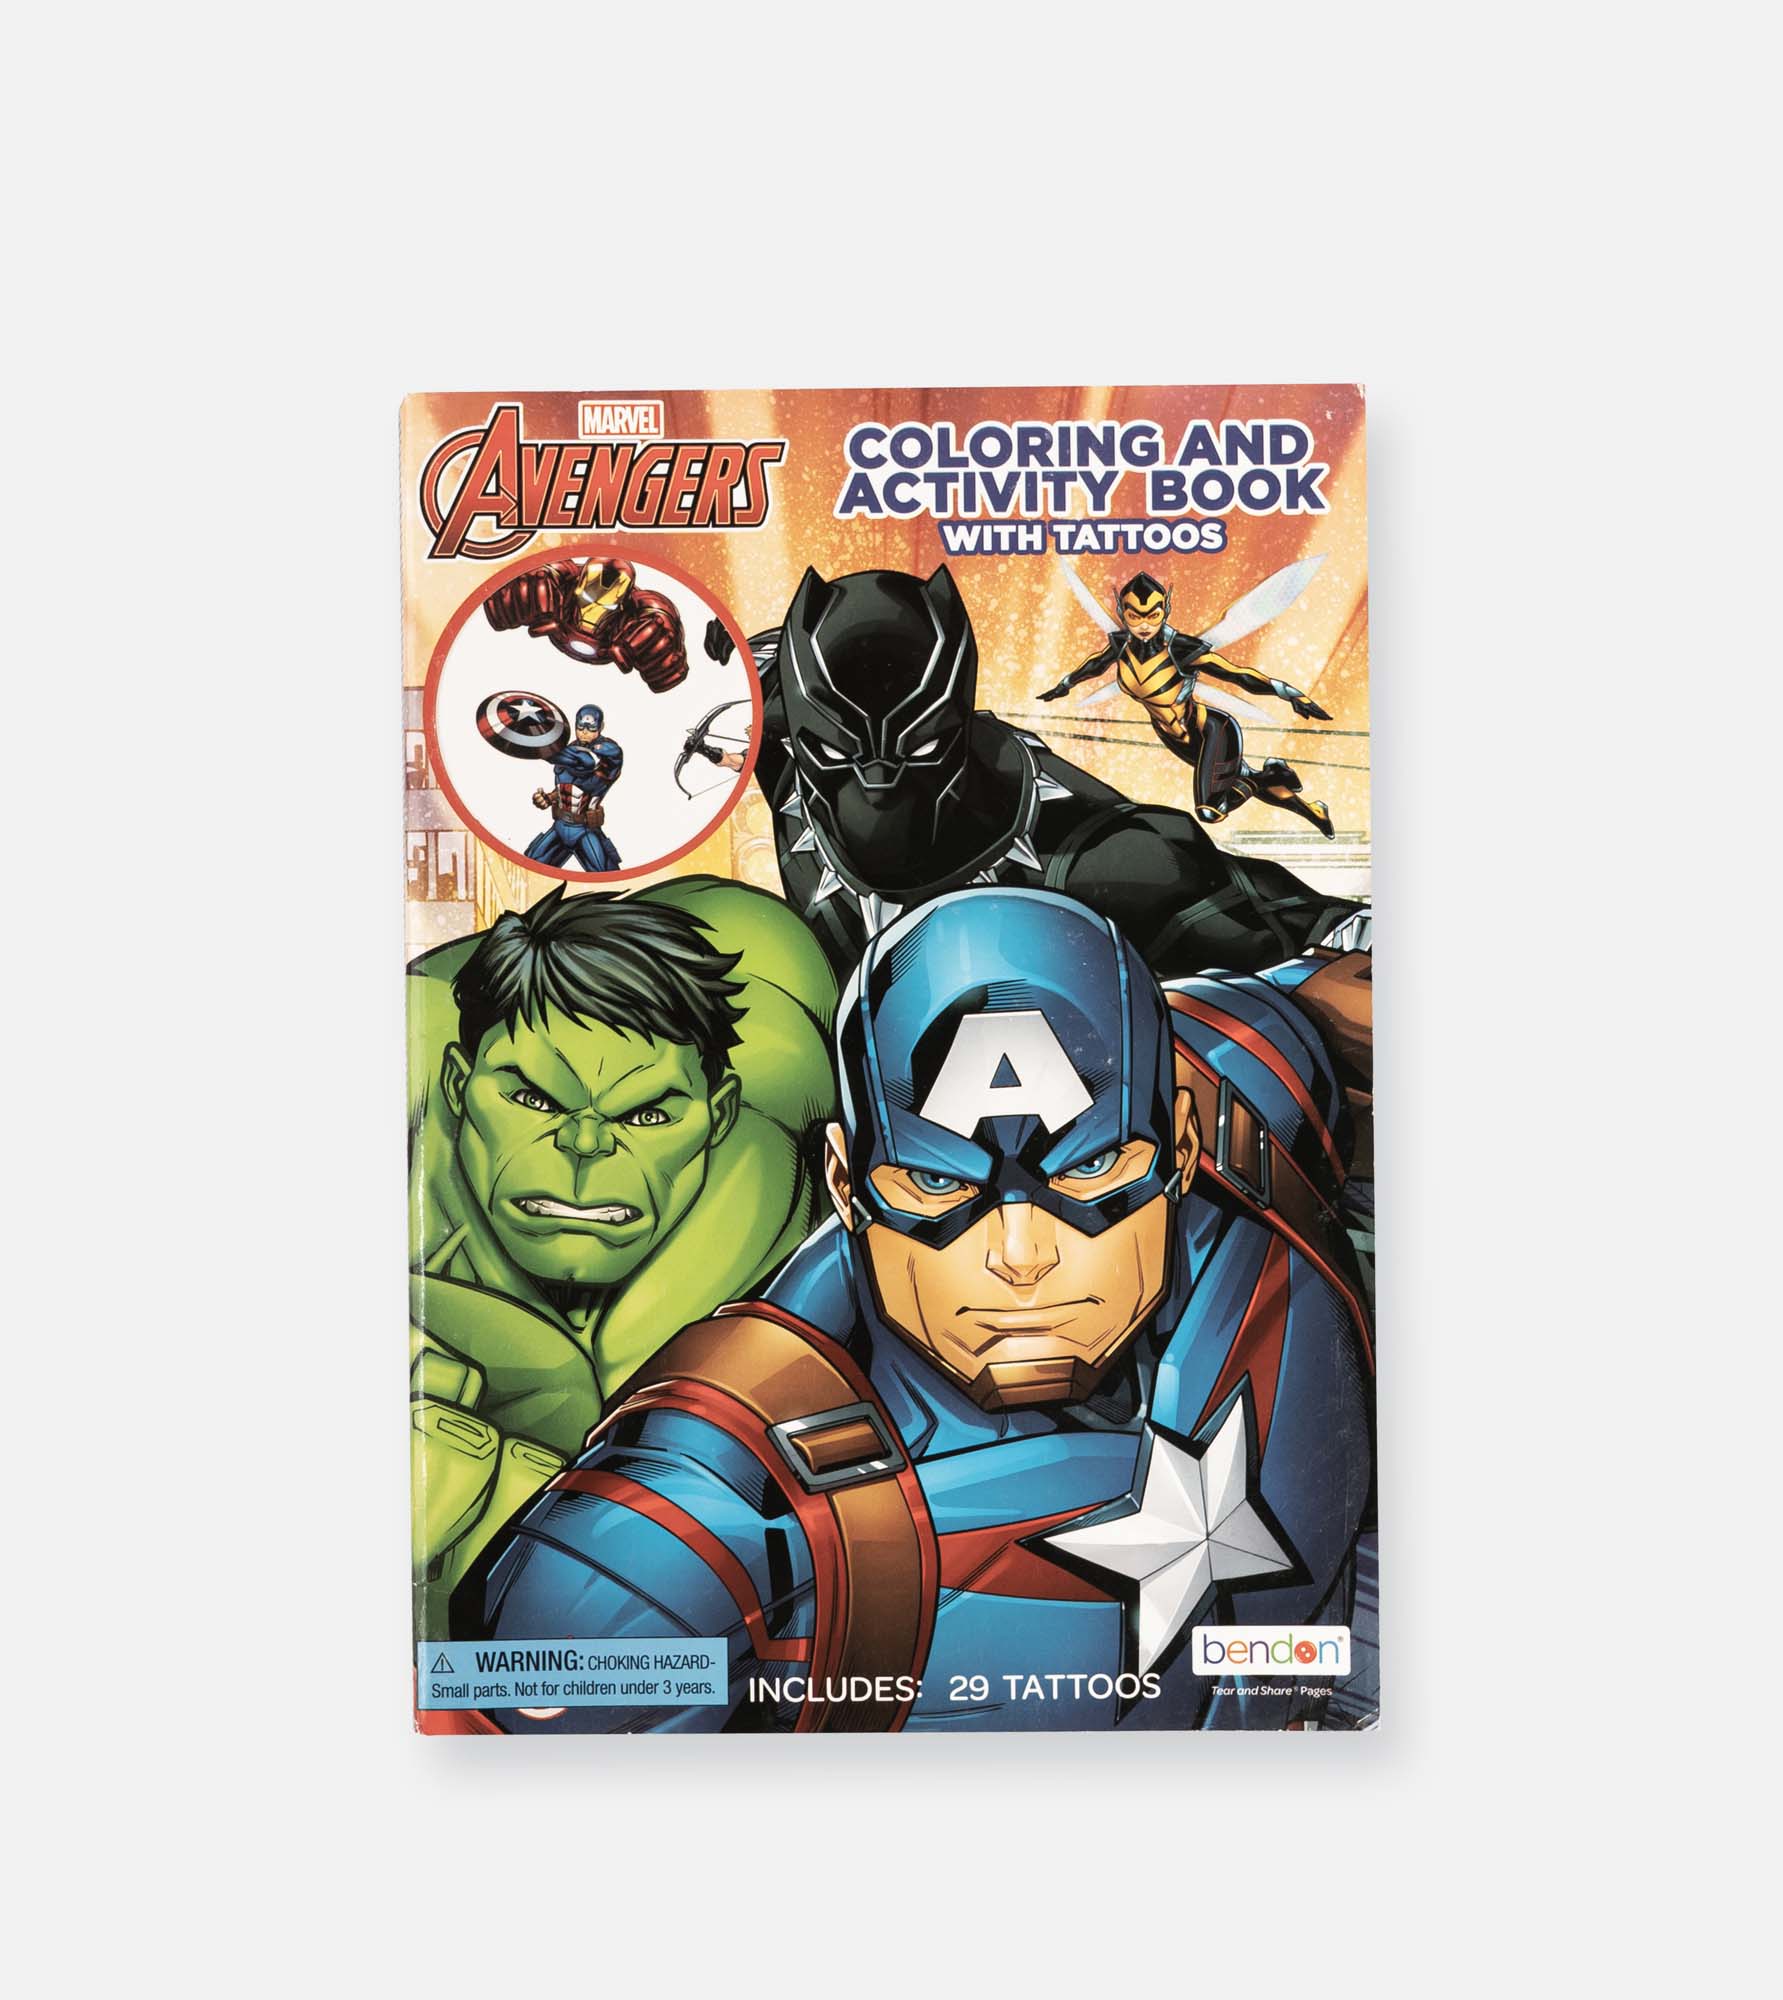 Avengers Coloring & Activity book